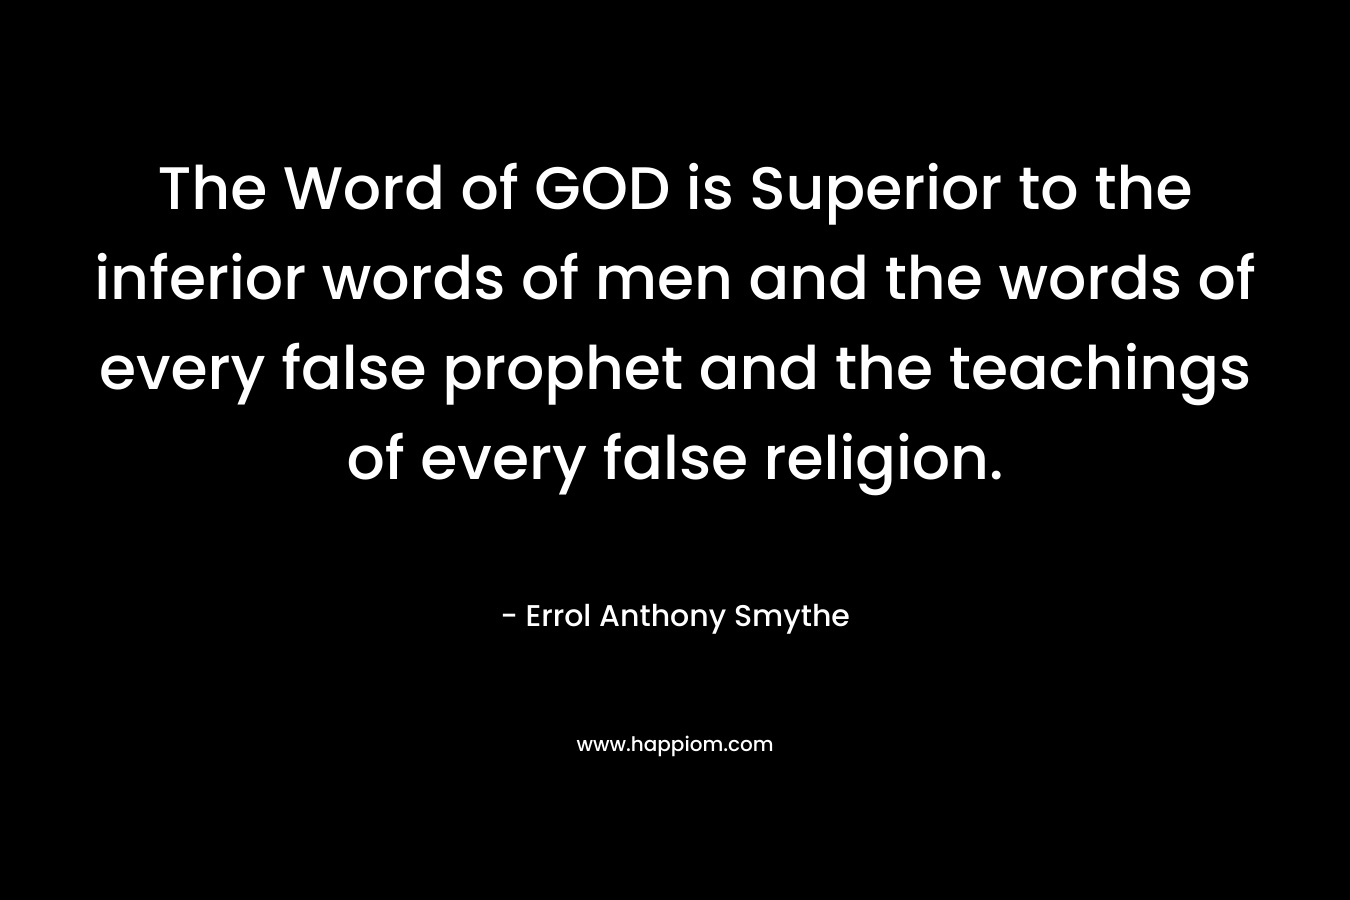 The Word of GOD is Superior to the inferior words of men and the words of every false prophet and the teachings of every false religion. – Errol Anthony Smythe